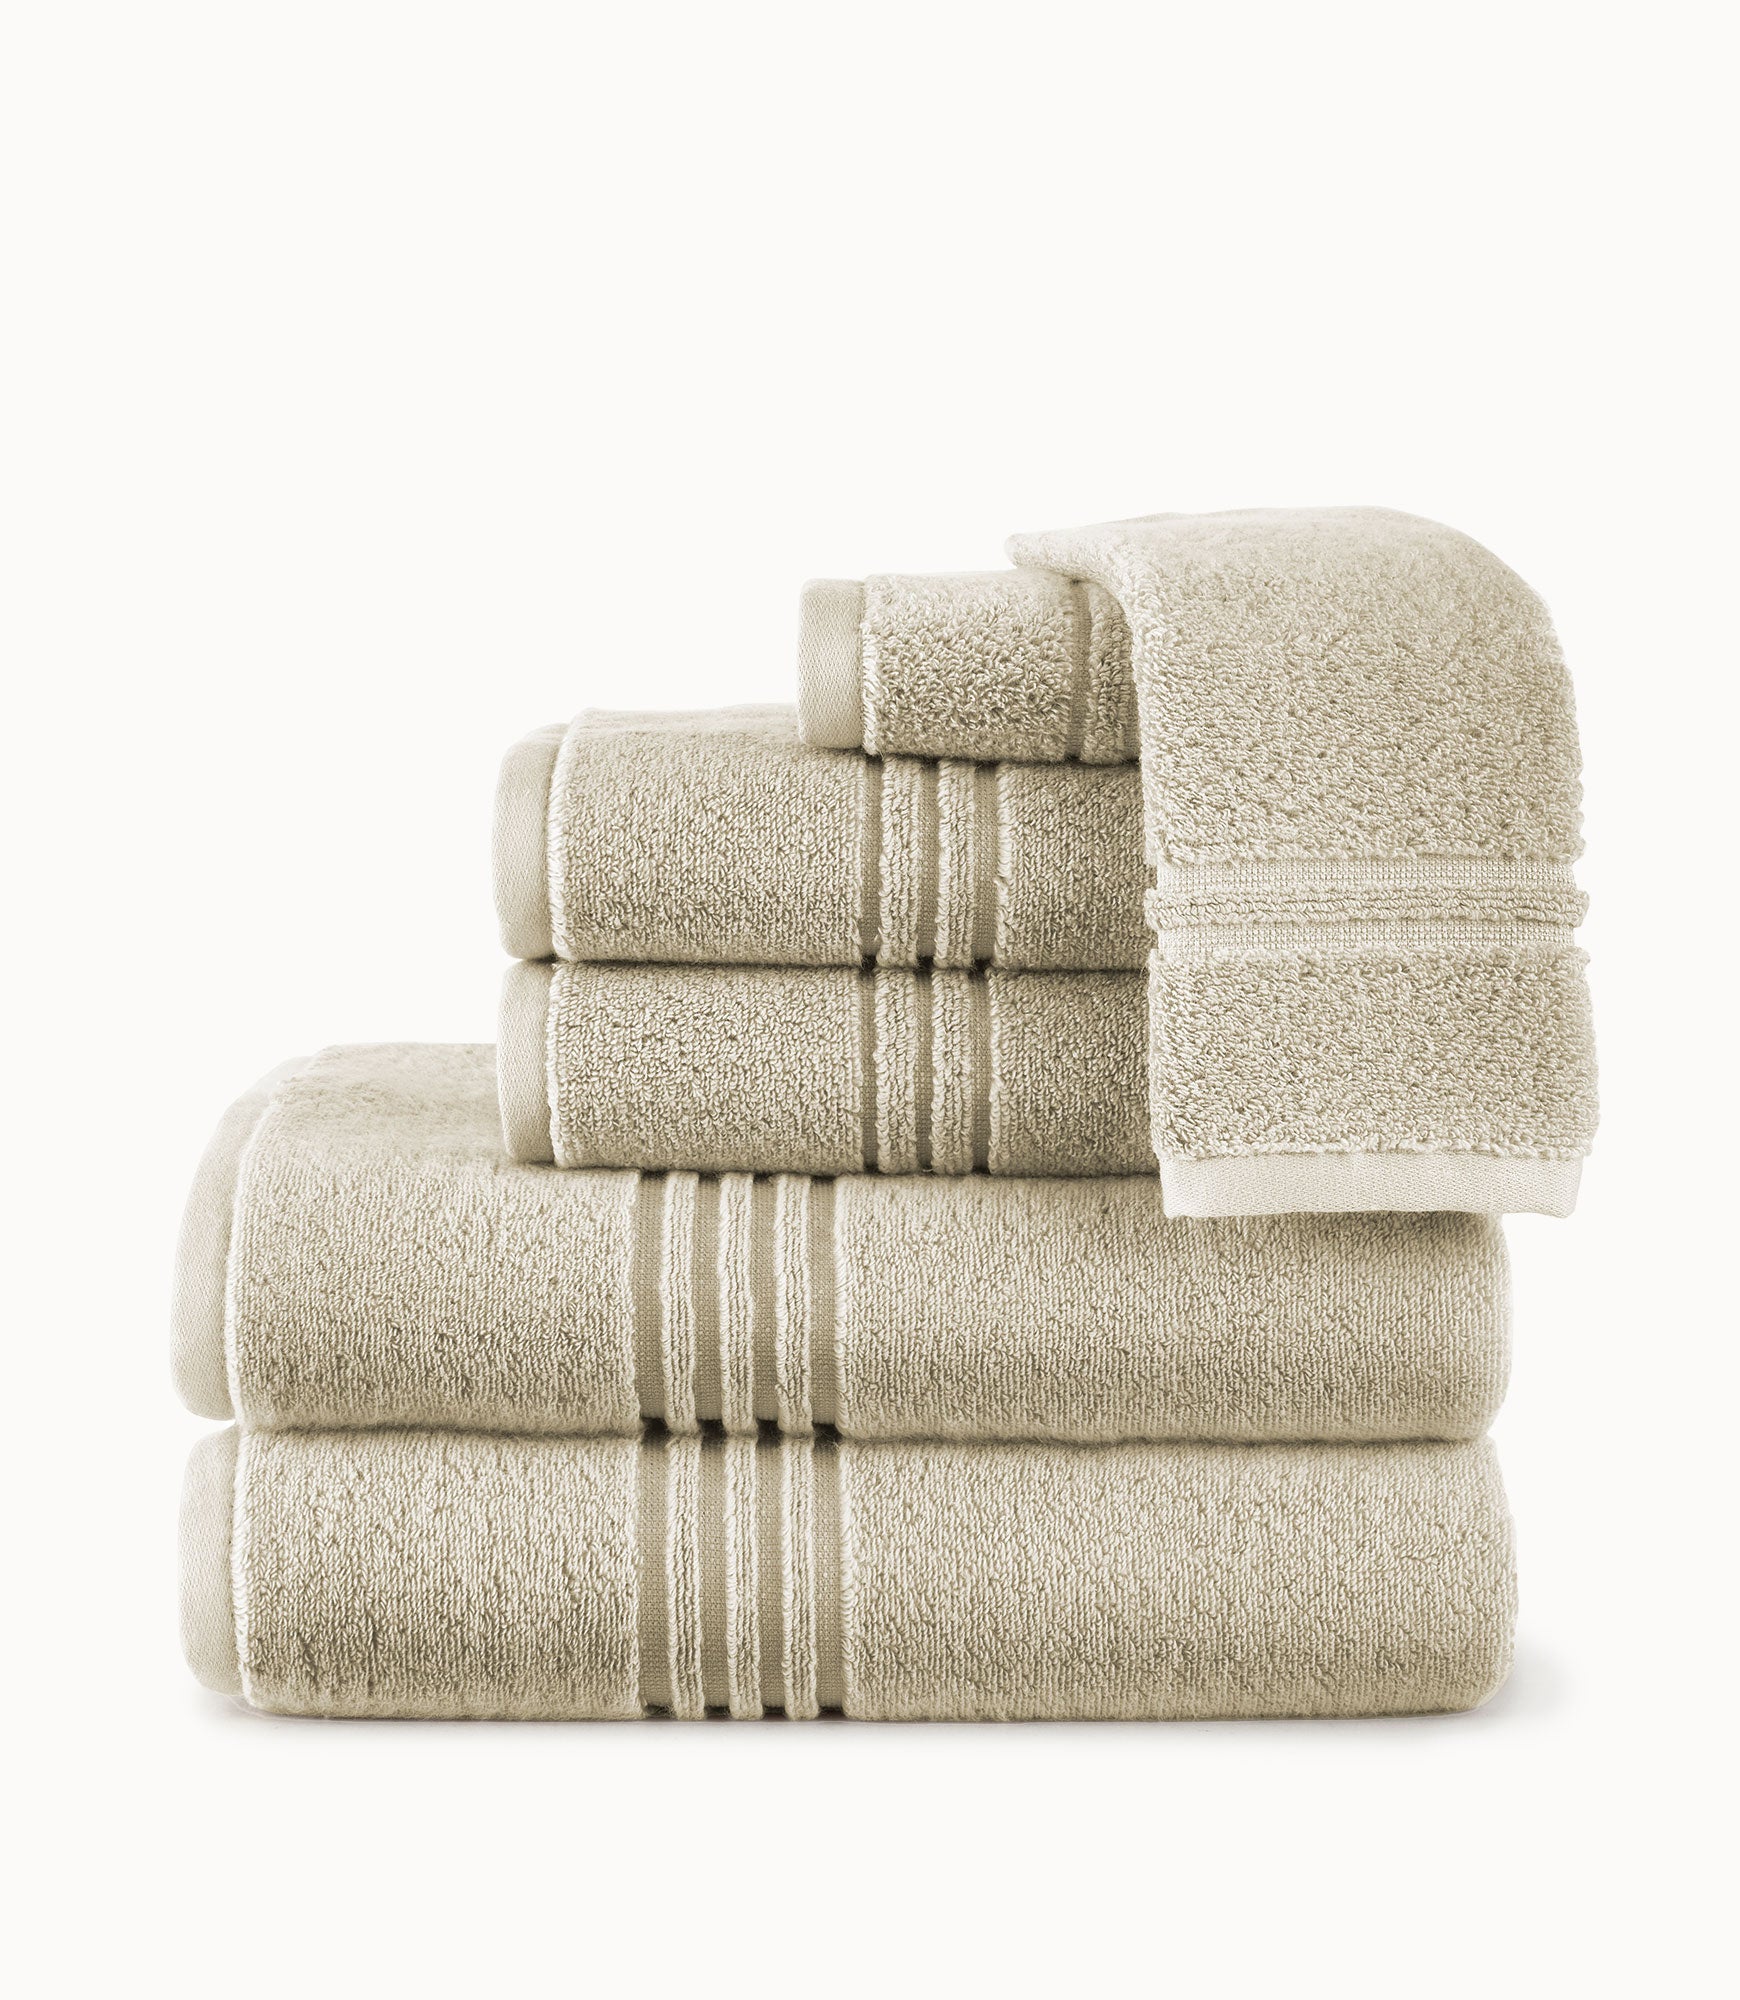 Peacock Alley Chelsea Towels - Luxury Towels with Zero Twist Technology -  100% Long Staple Cotton Fluffy Lightweight Towels - 12pc Towel Set (Ivory)